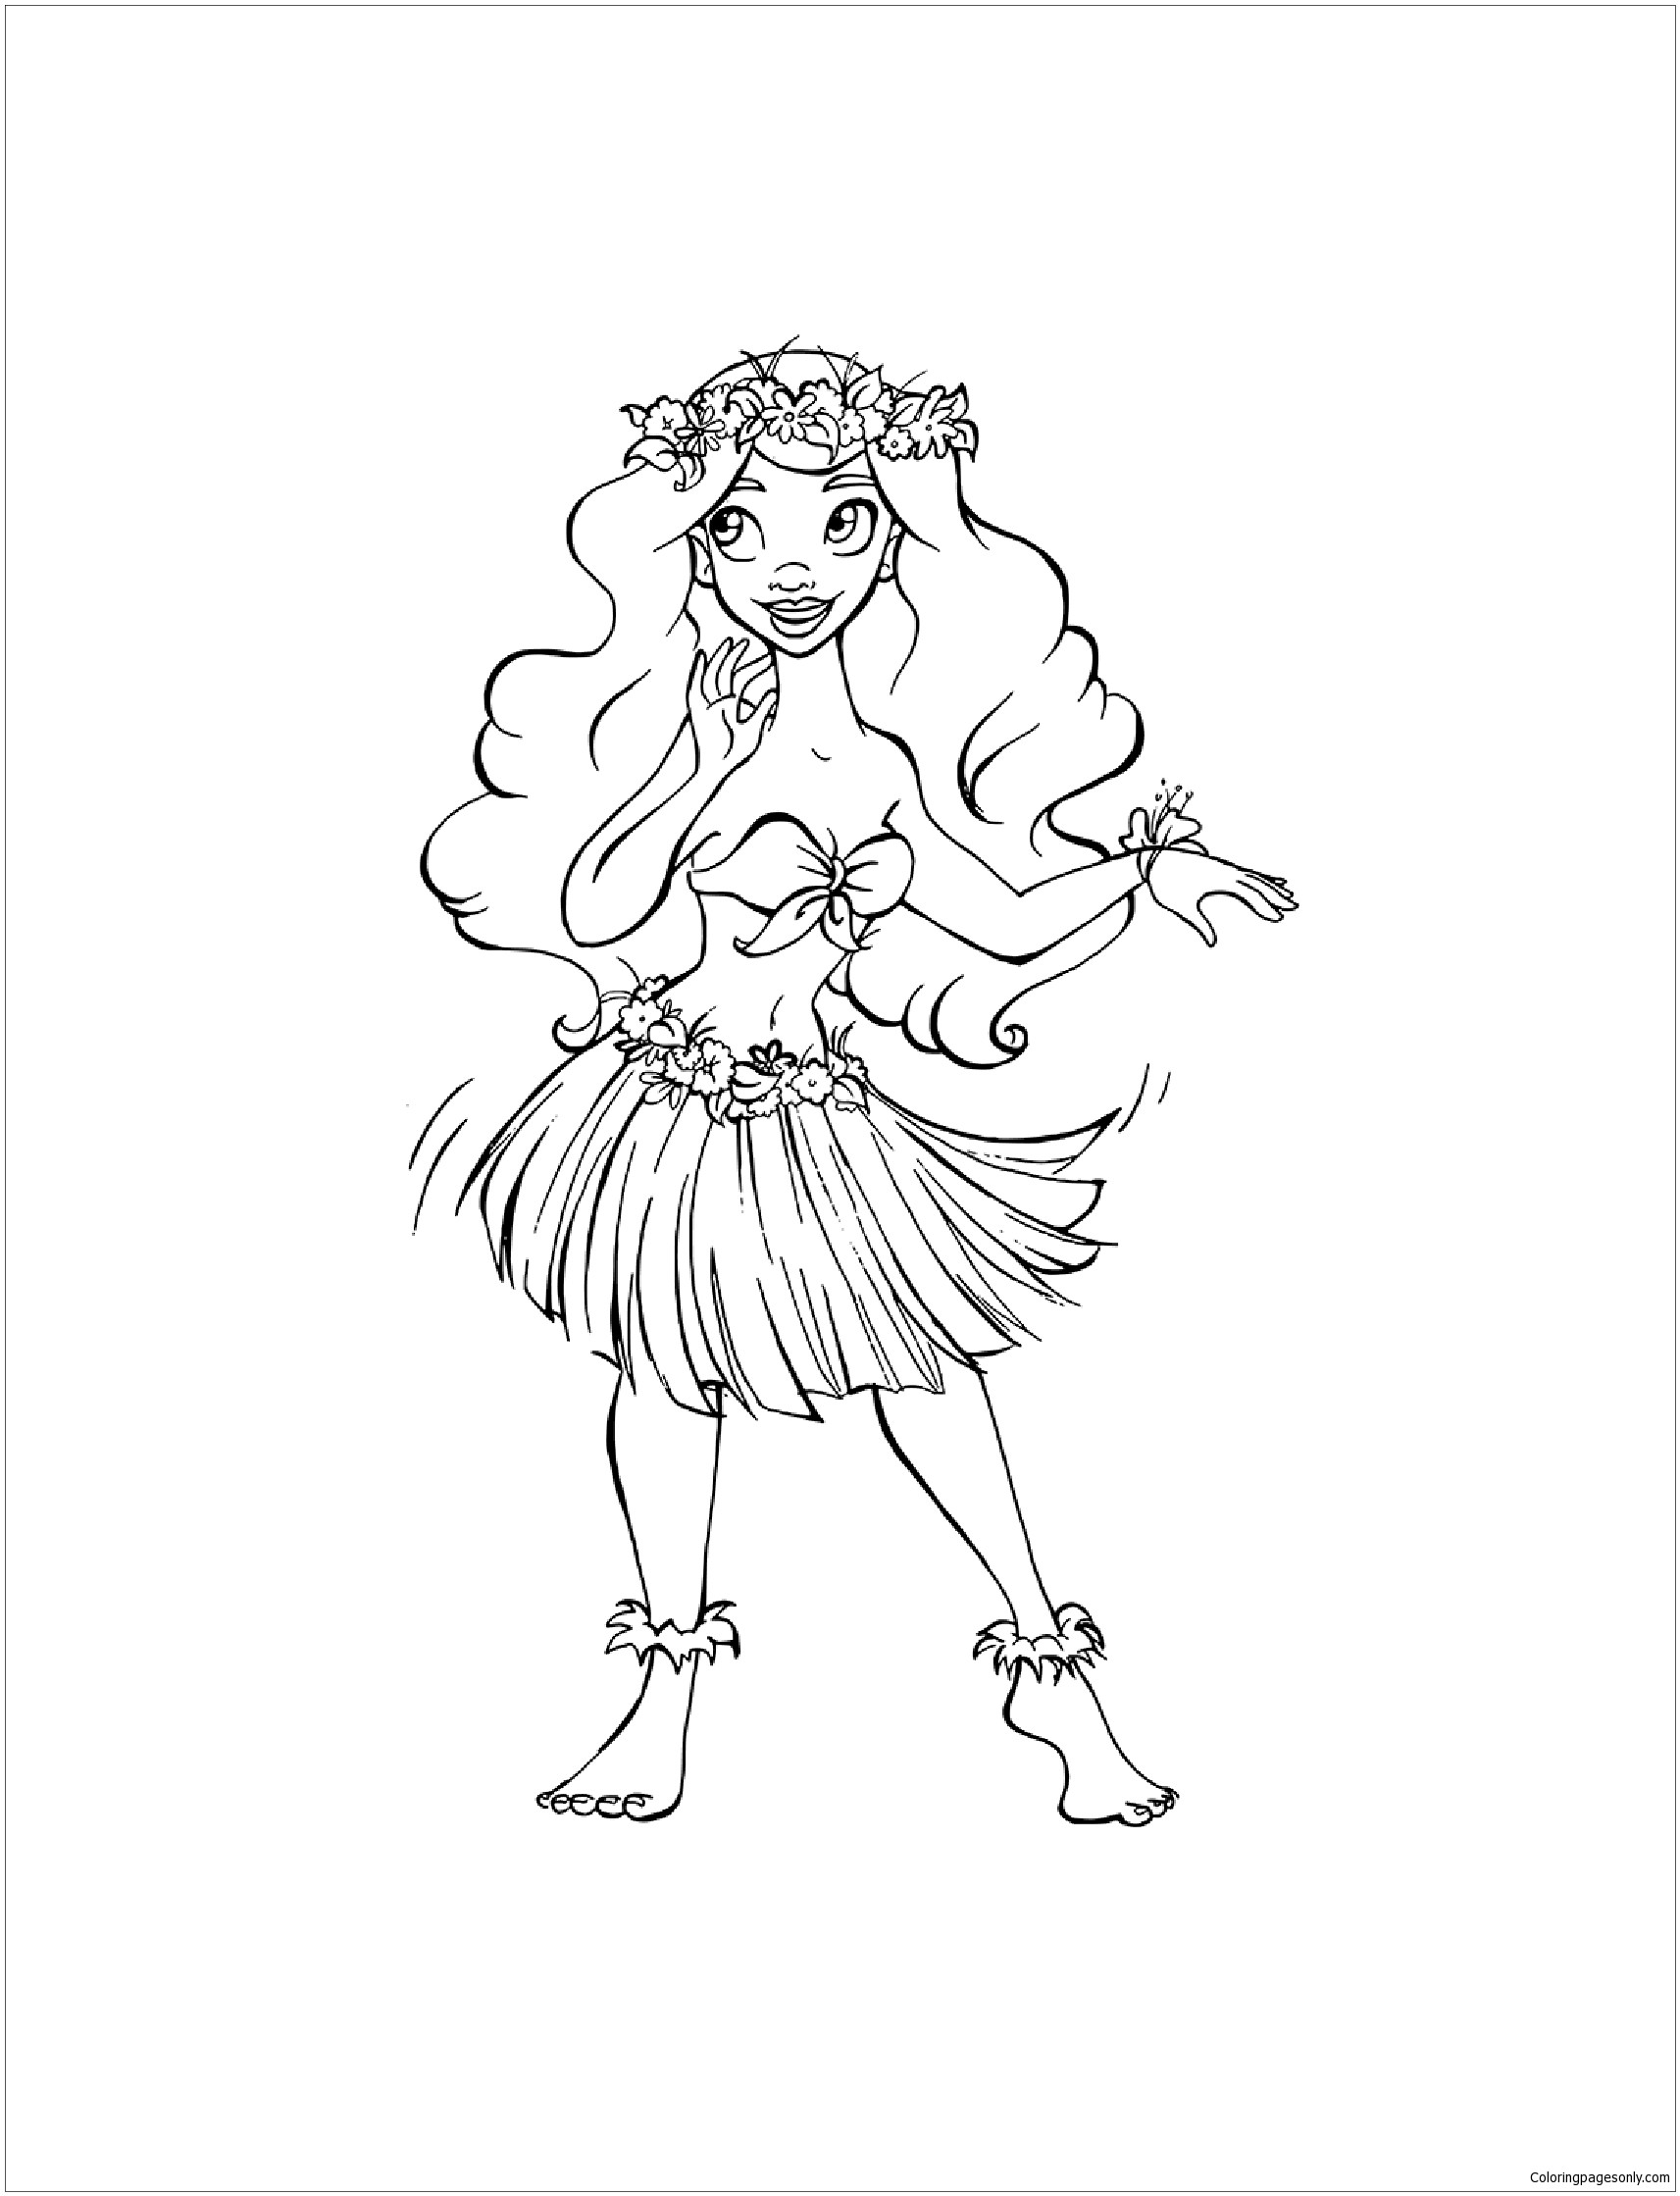 Hula Girls Coloring Pages
 Hula Girl Coloring Page Free Coloring Pages line